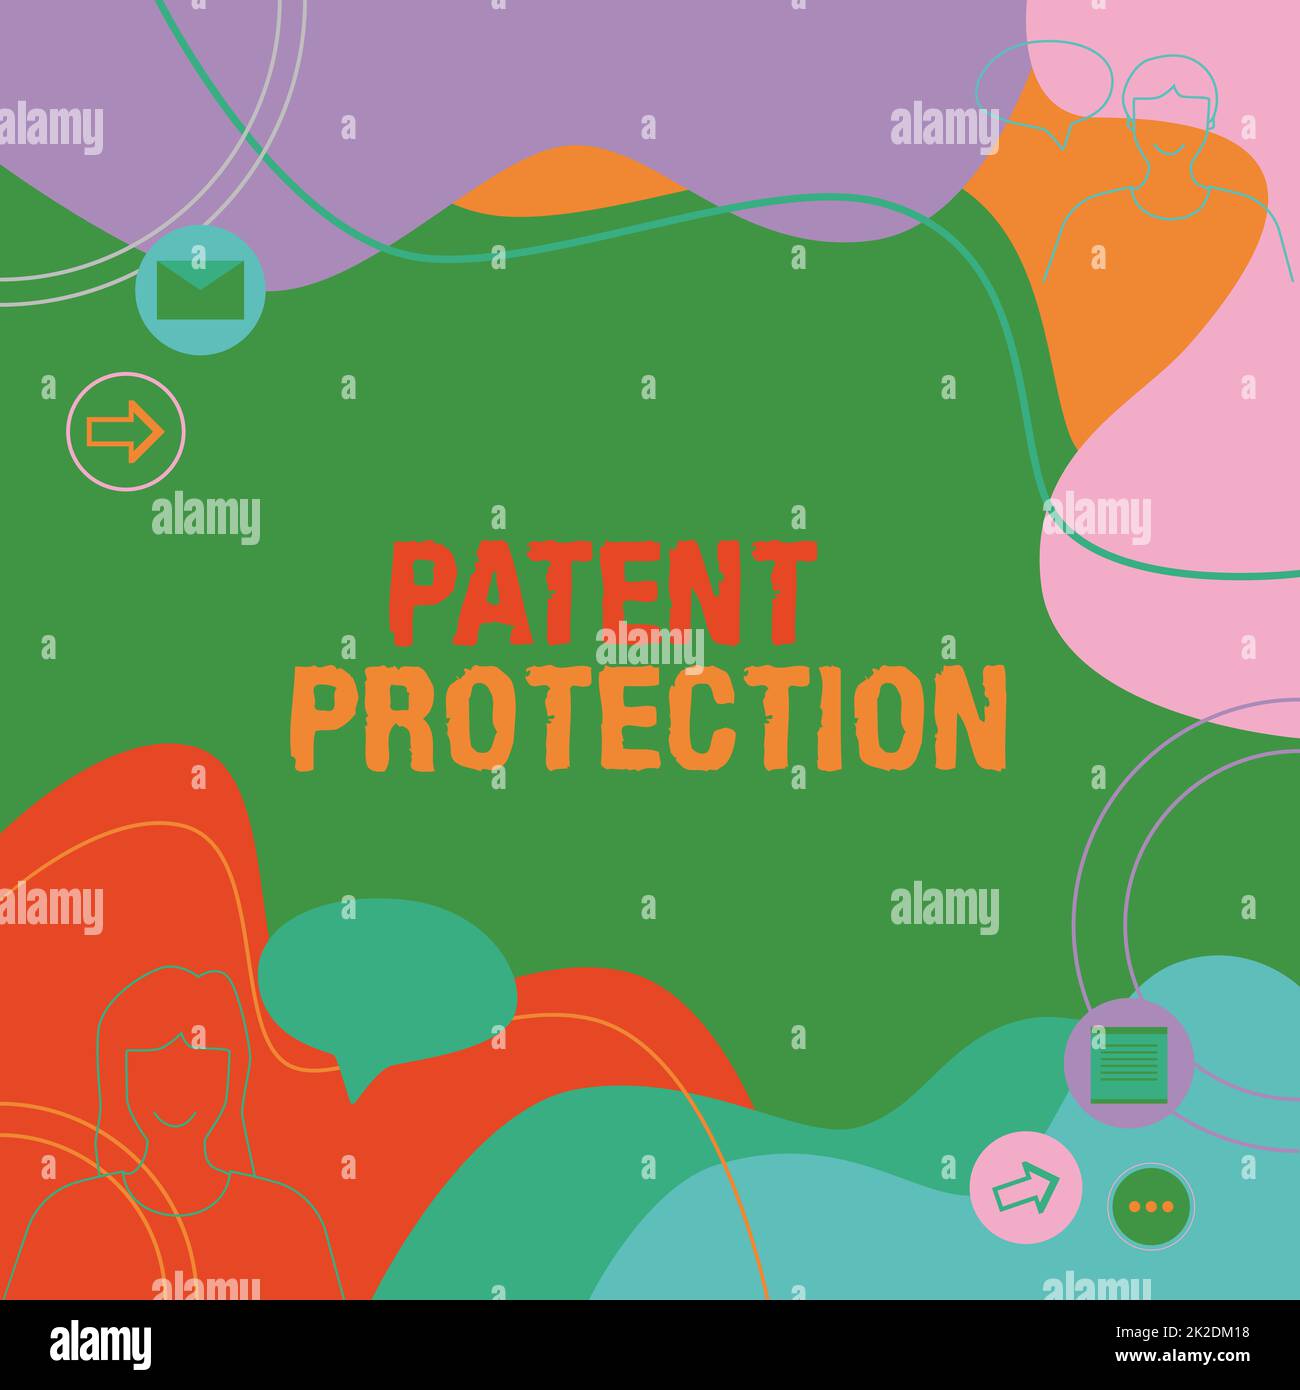 Text caption presenting Patent Protection. Business idea provides a person or legal entity with exclusive rights Illustration Couple Speaking In Chat Stock Photo